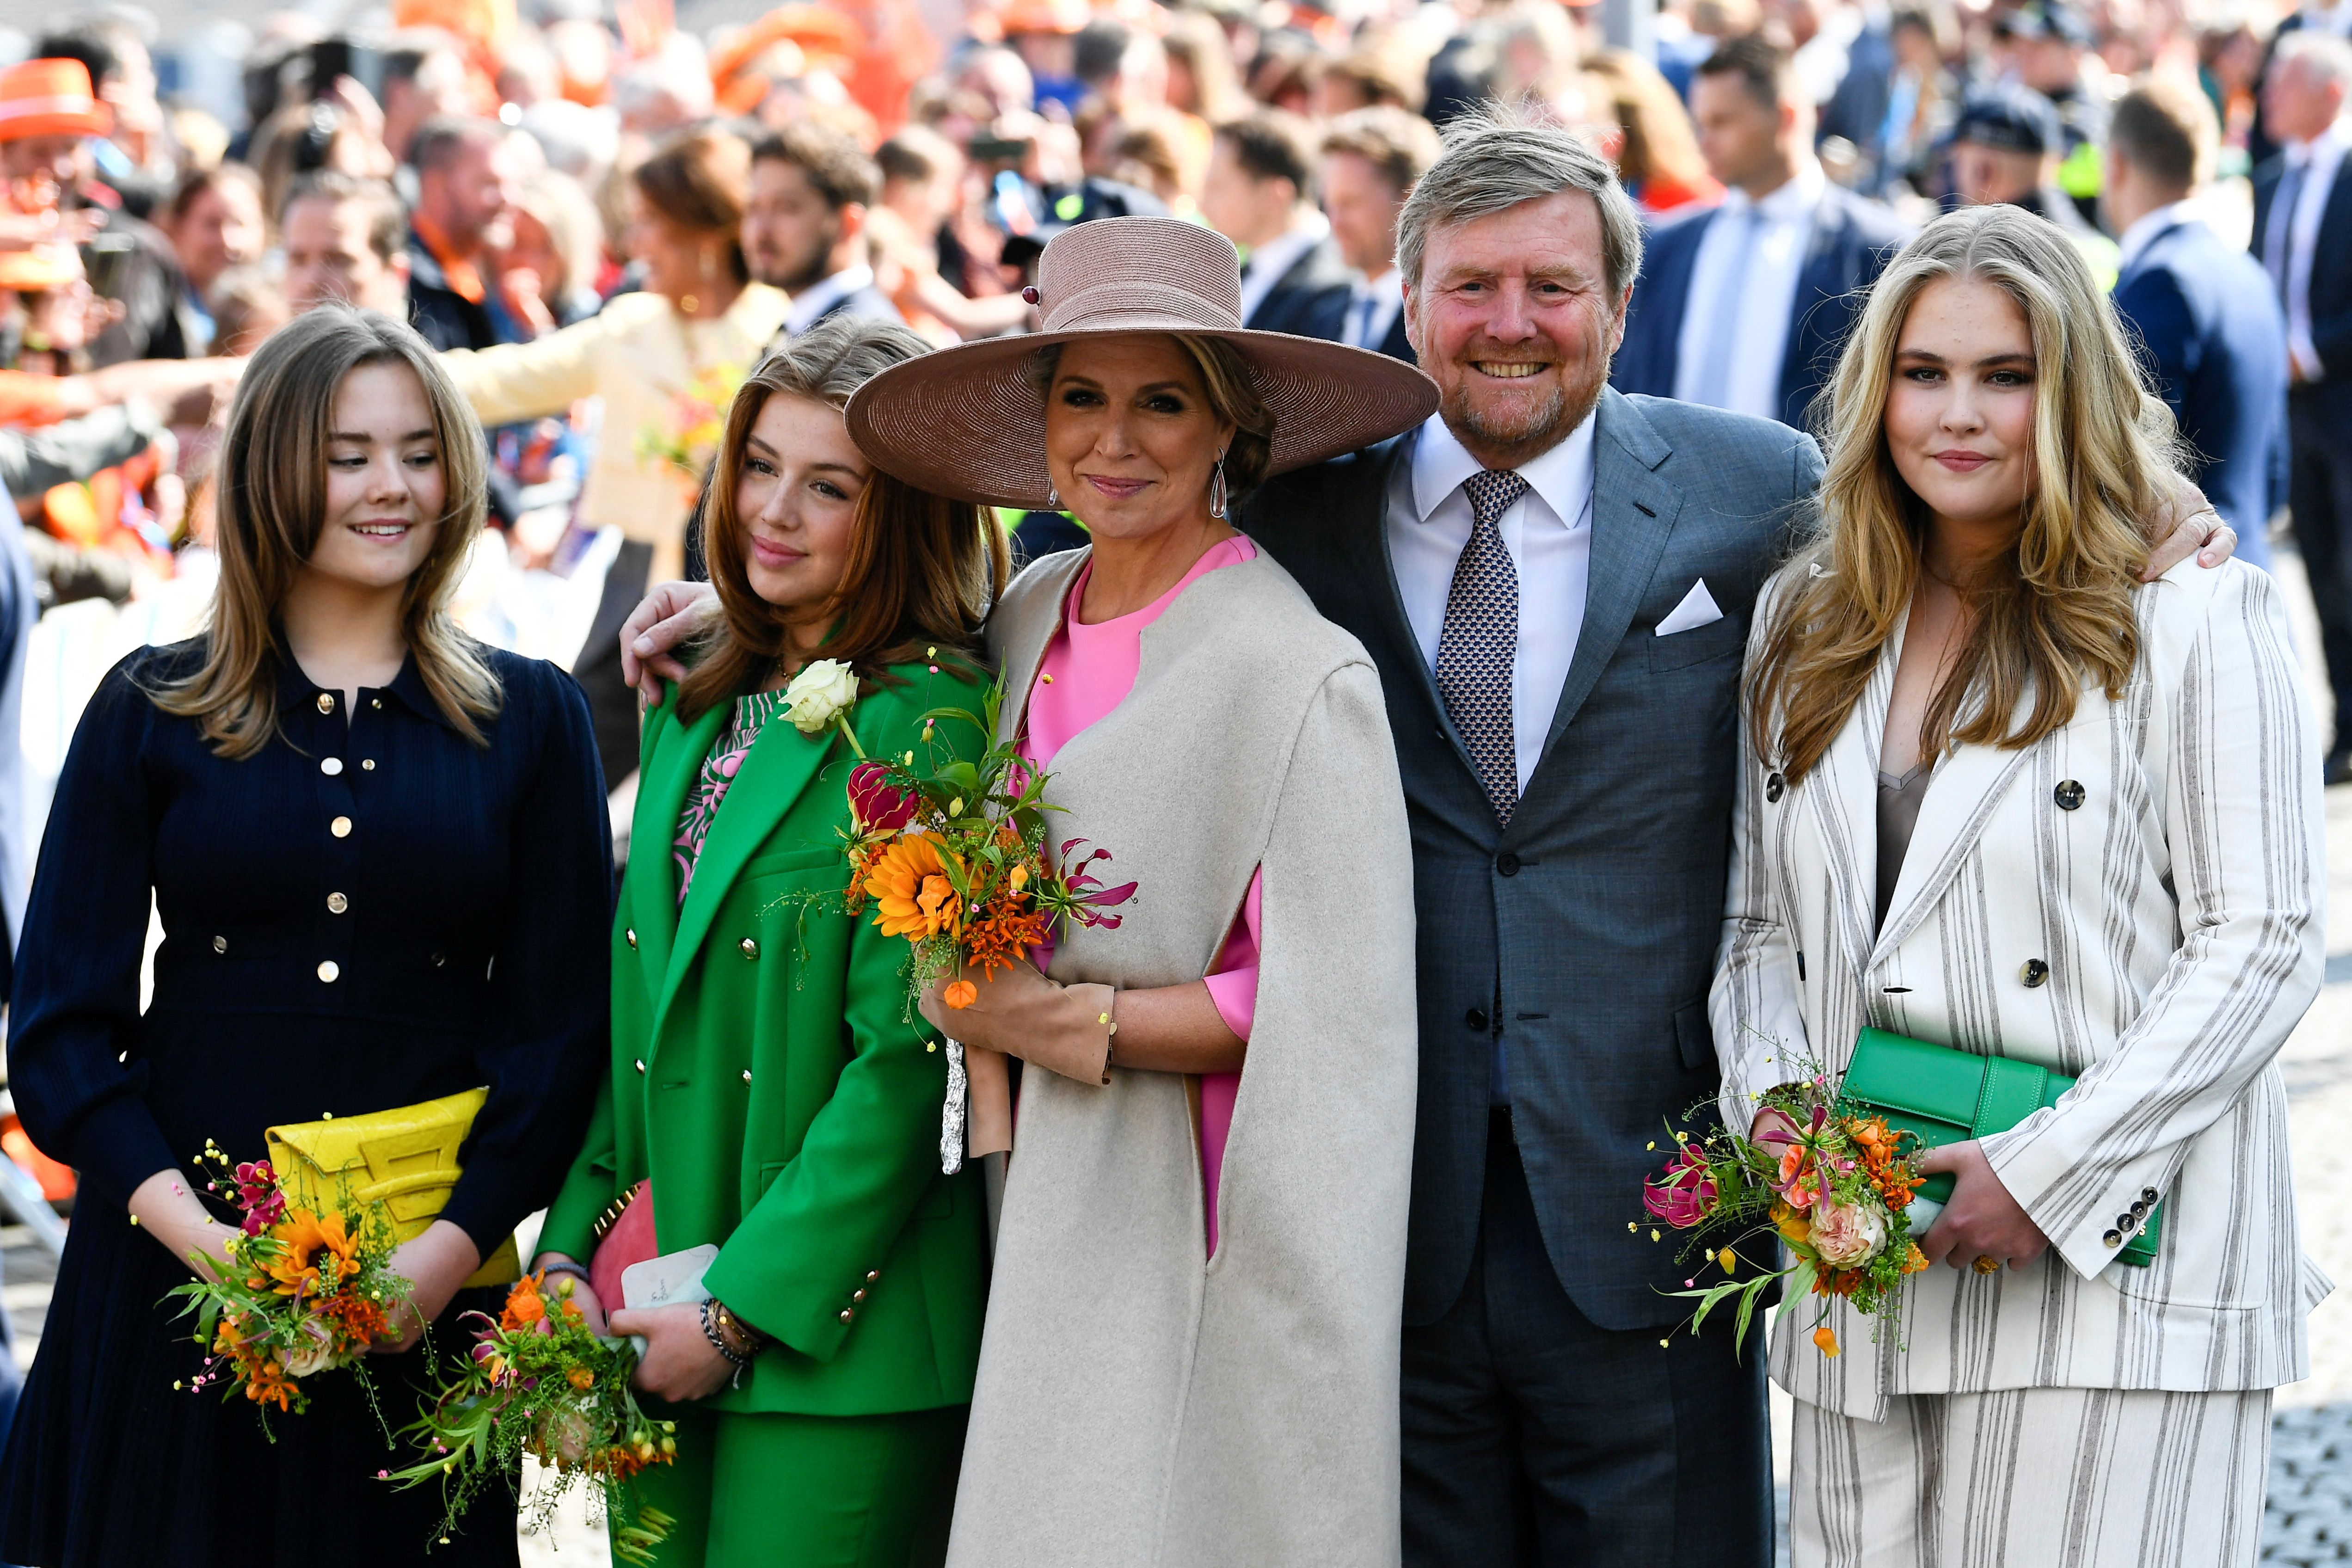 Dutch King's Day celebrations in Maastricht